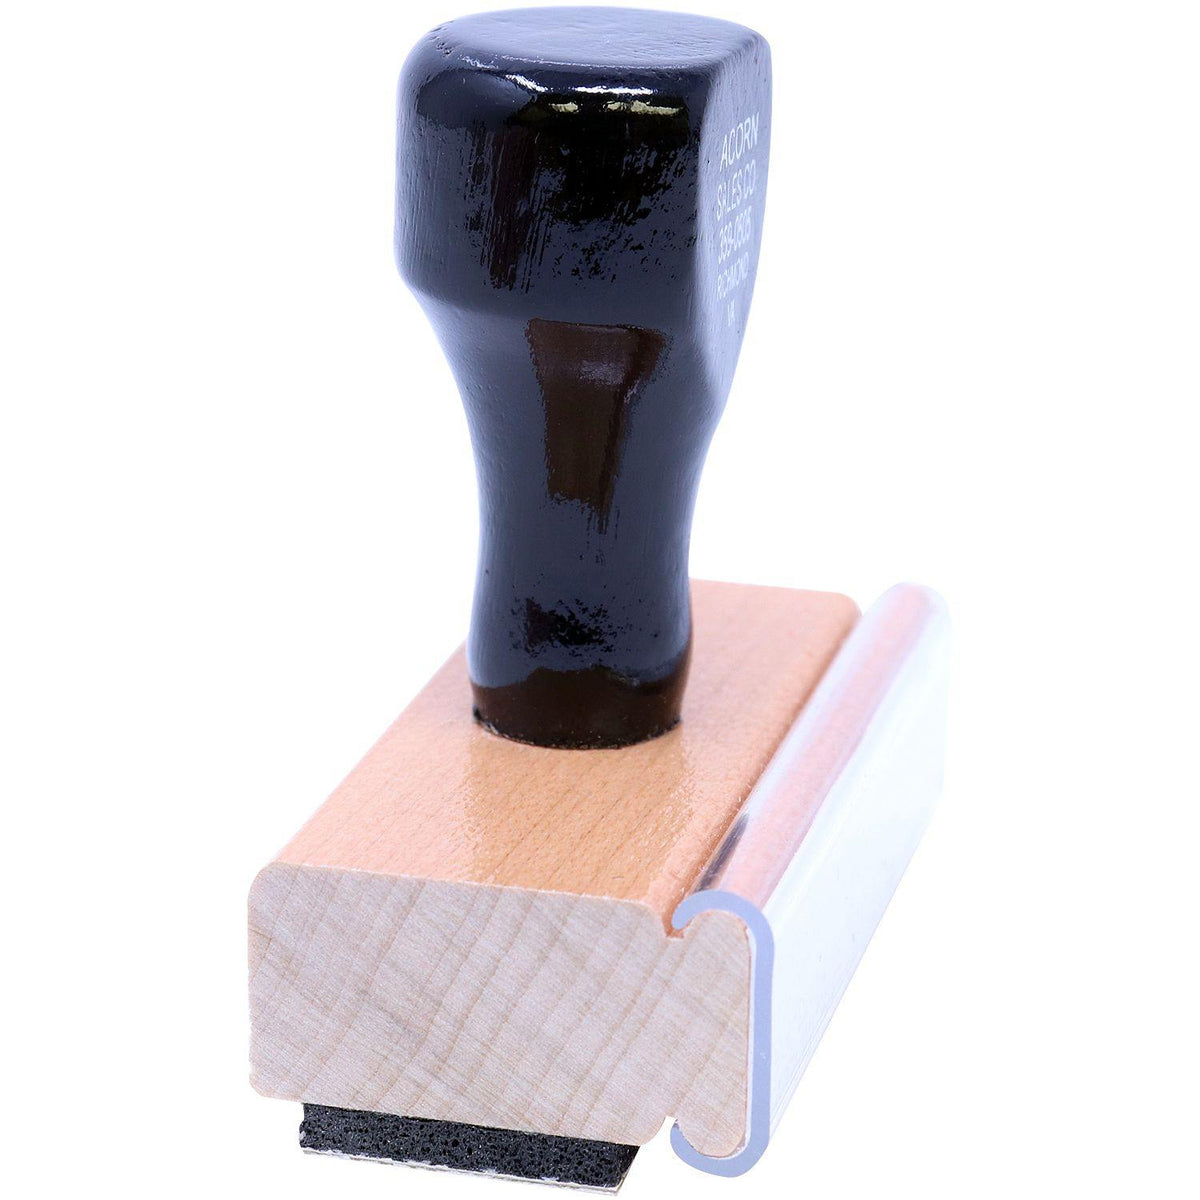 Side View of Admitted Rubber Stamp at an Angle